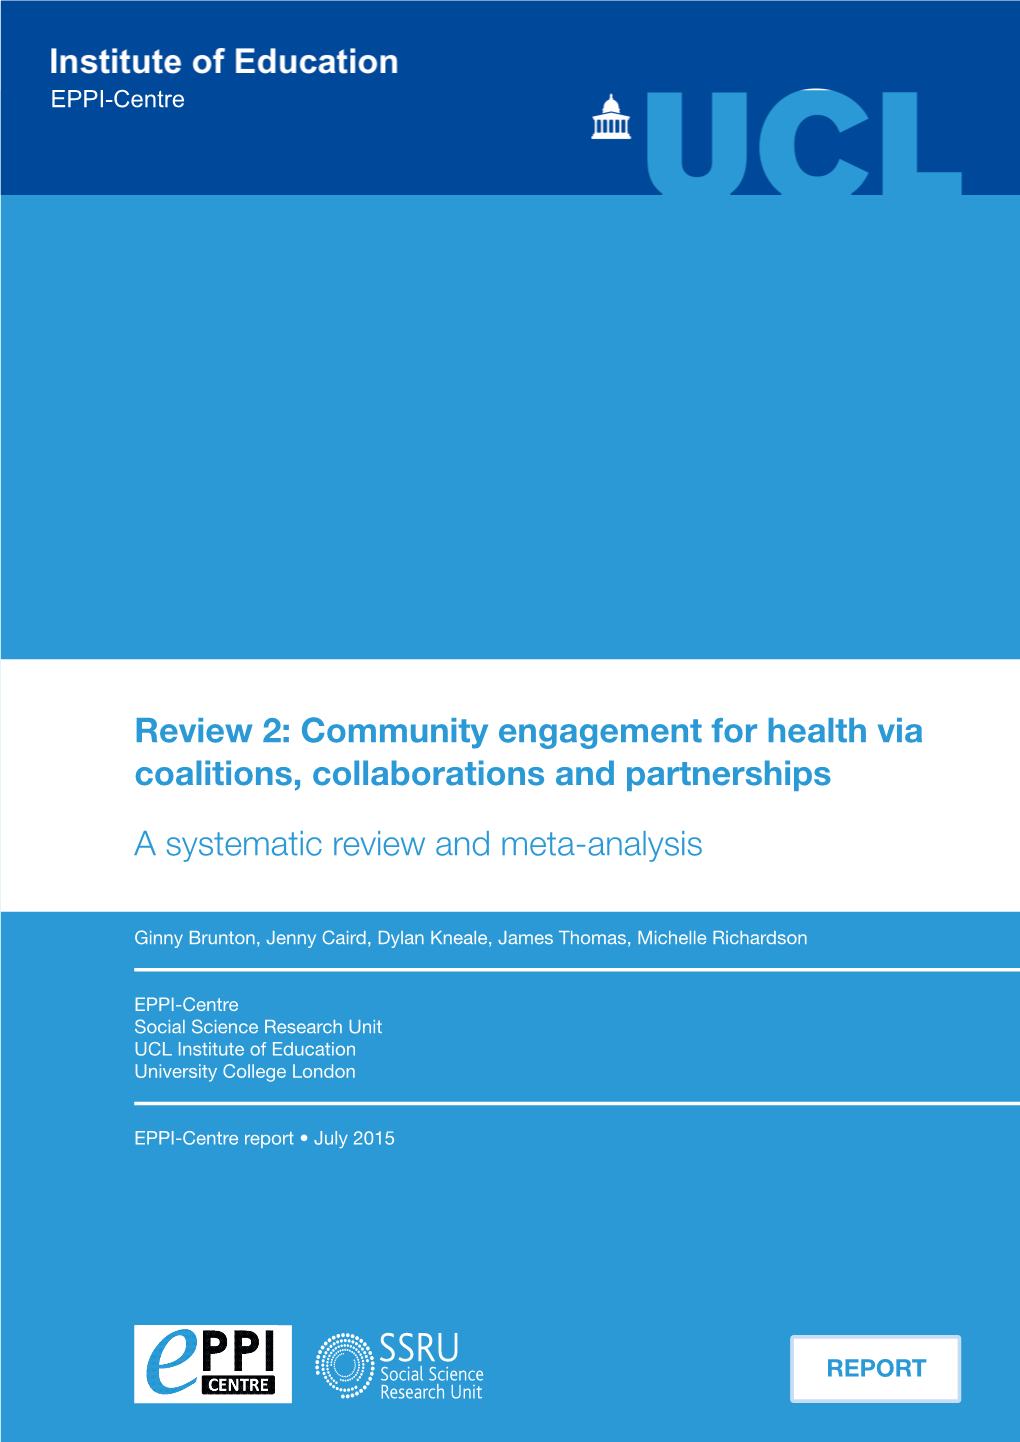 Review 2: Community Engagement for Health Via Coalitions, Collaborations and Partnerships